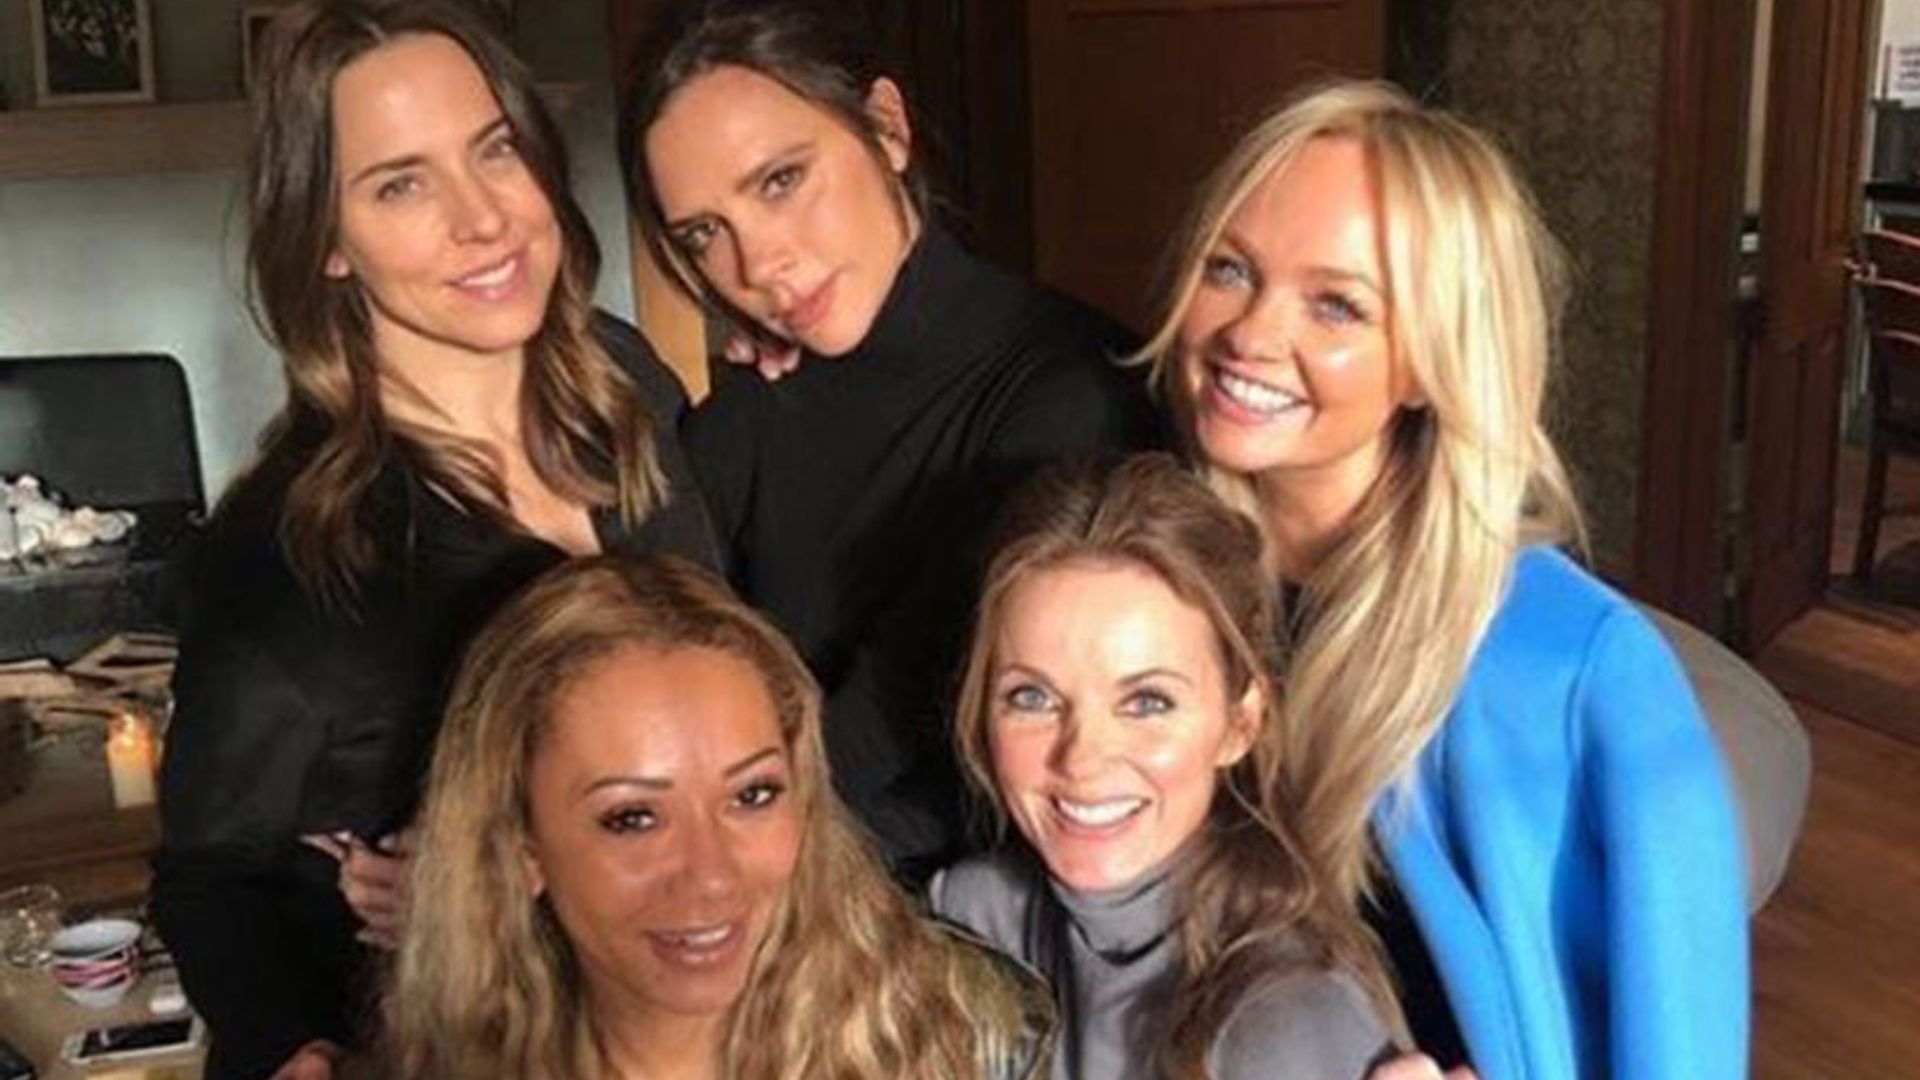 Emma Bunton reveals the real reason why the Spice Girls reunion happened at Geri Horner's house